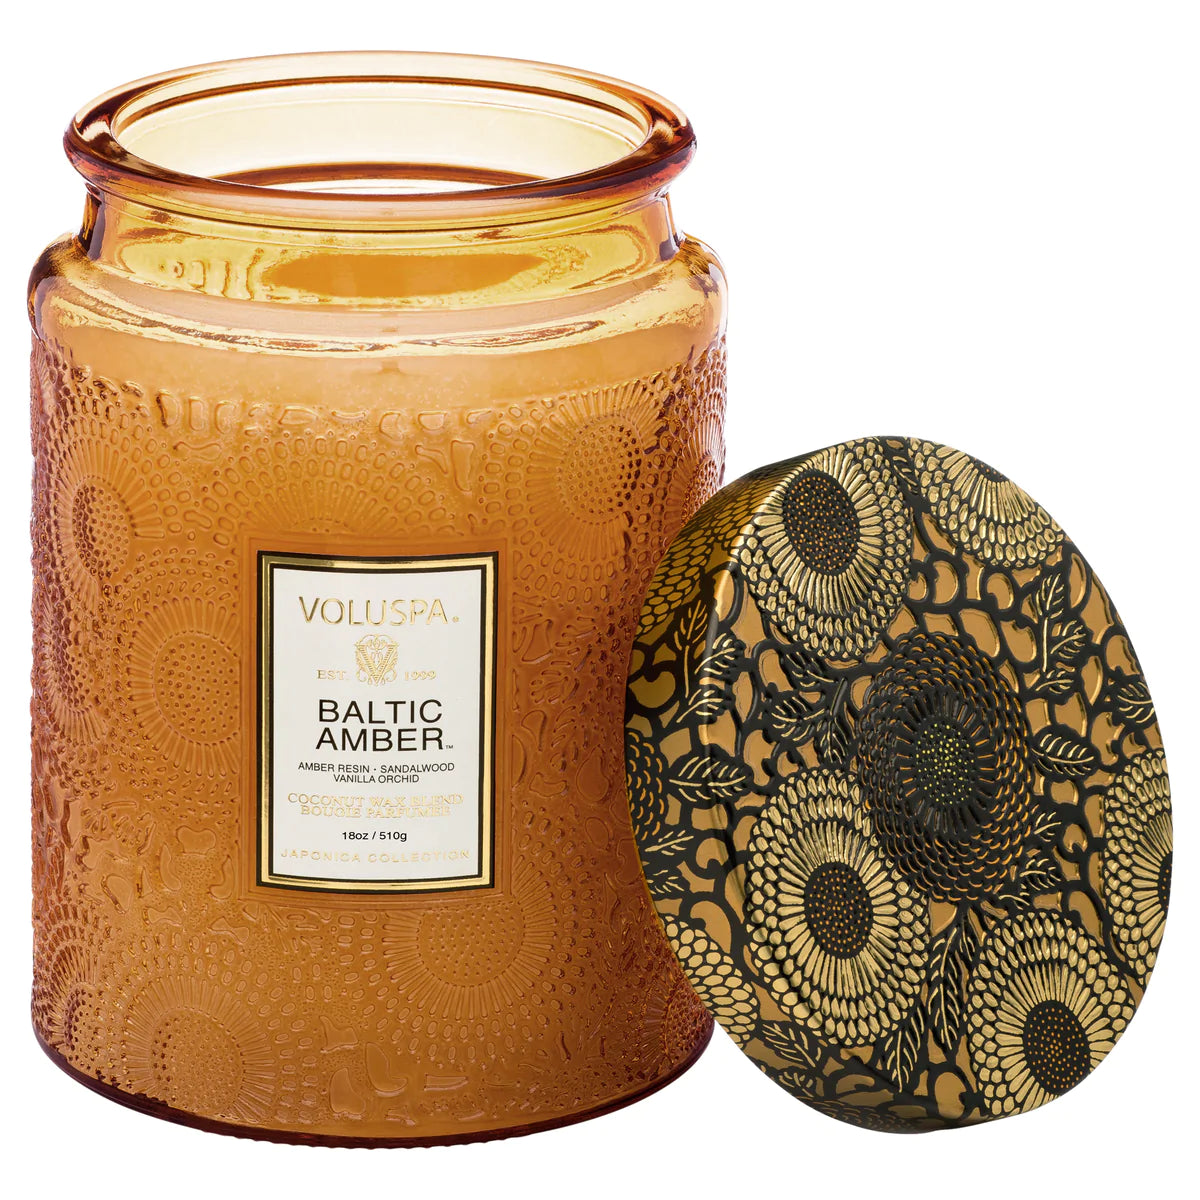 Voluspa Baltic Amber Large Jar Candle - Japonica Collection